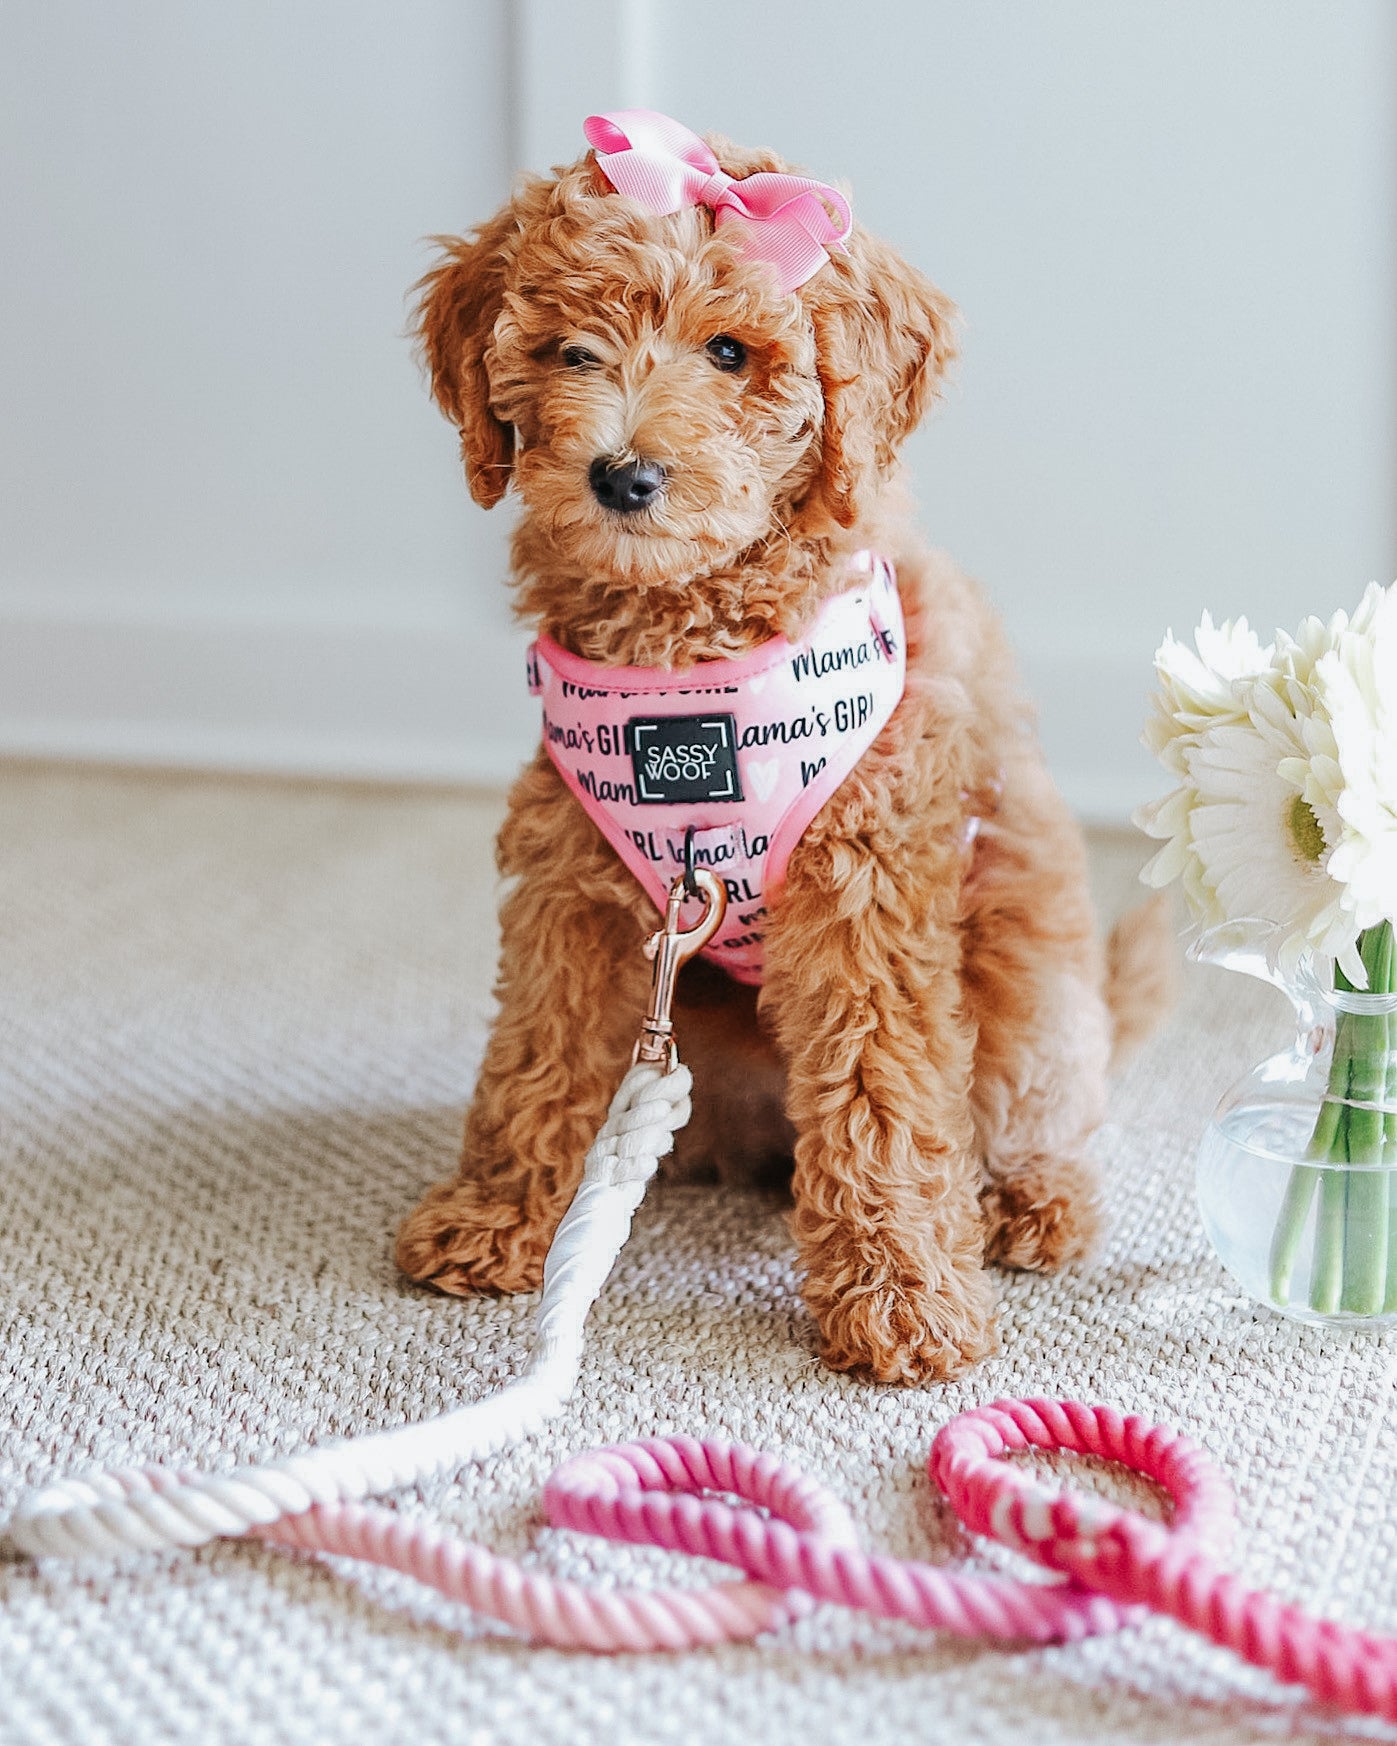 Dog Rope Leash - Ombre Pink